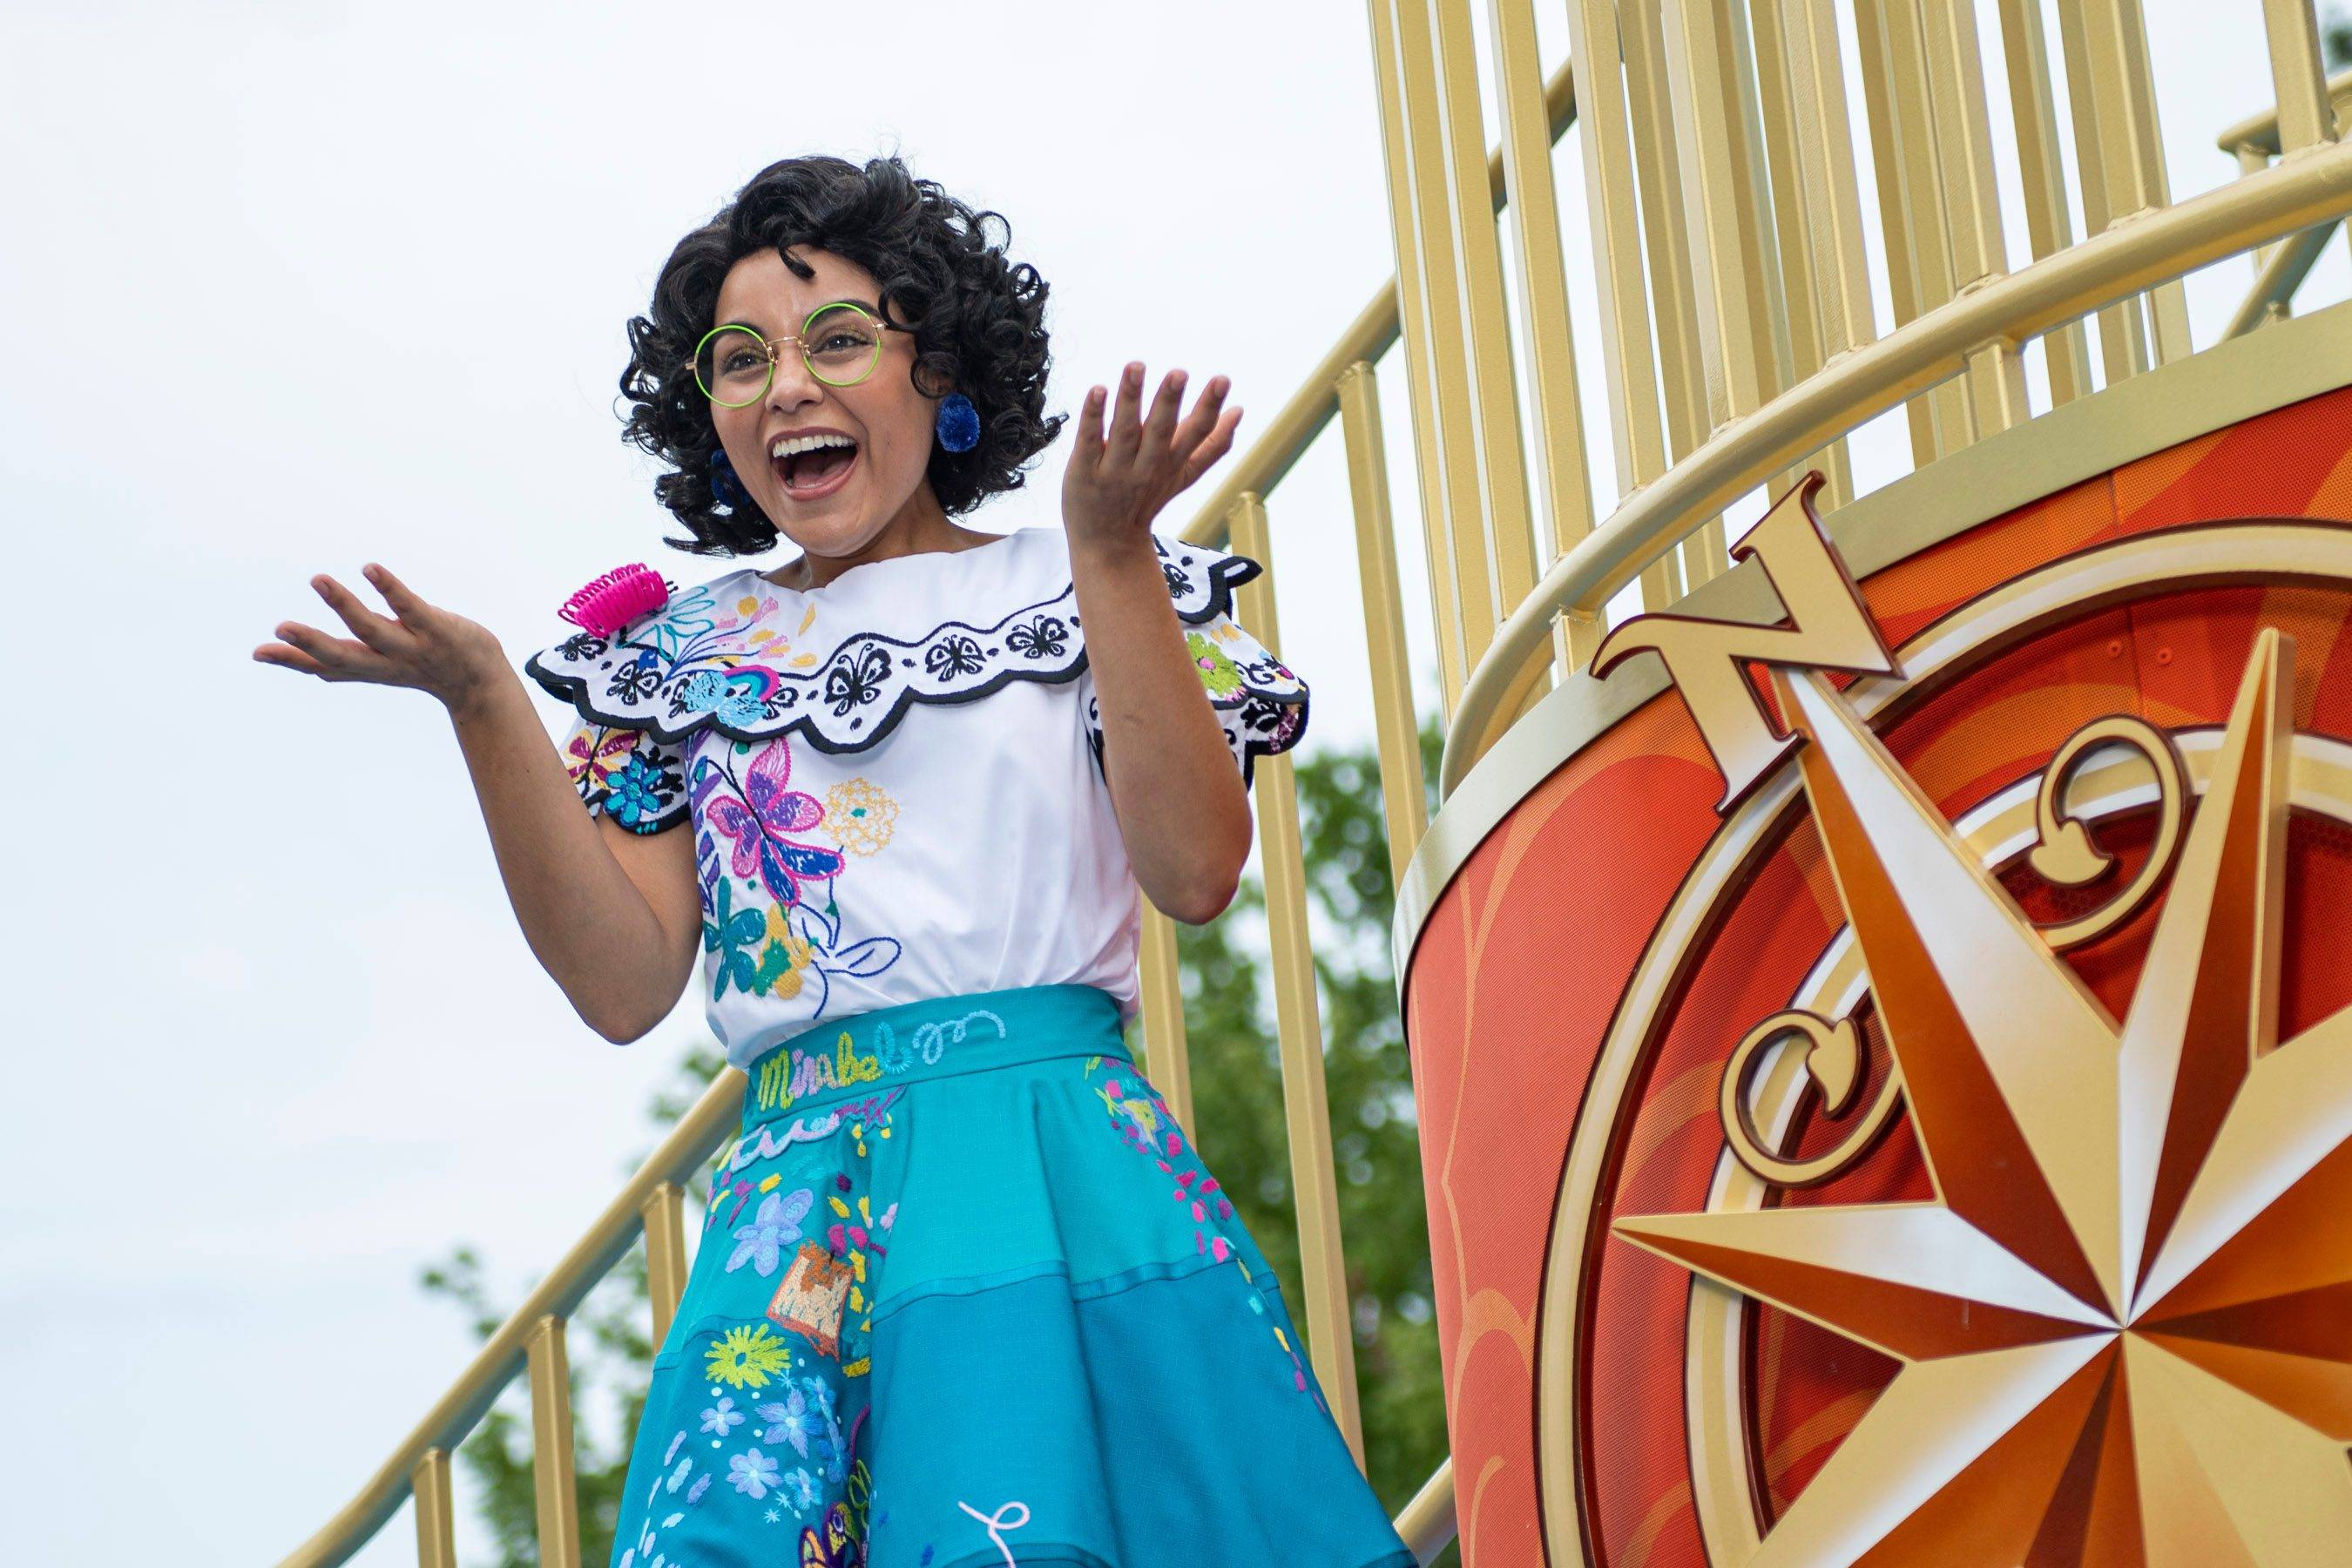 Mirabel coming to Adventure Friends Cavalcade and more characters returning across Walt Disney World